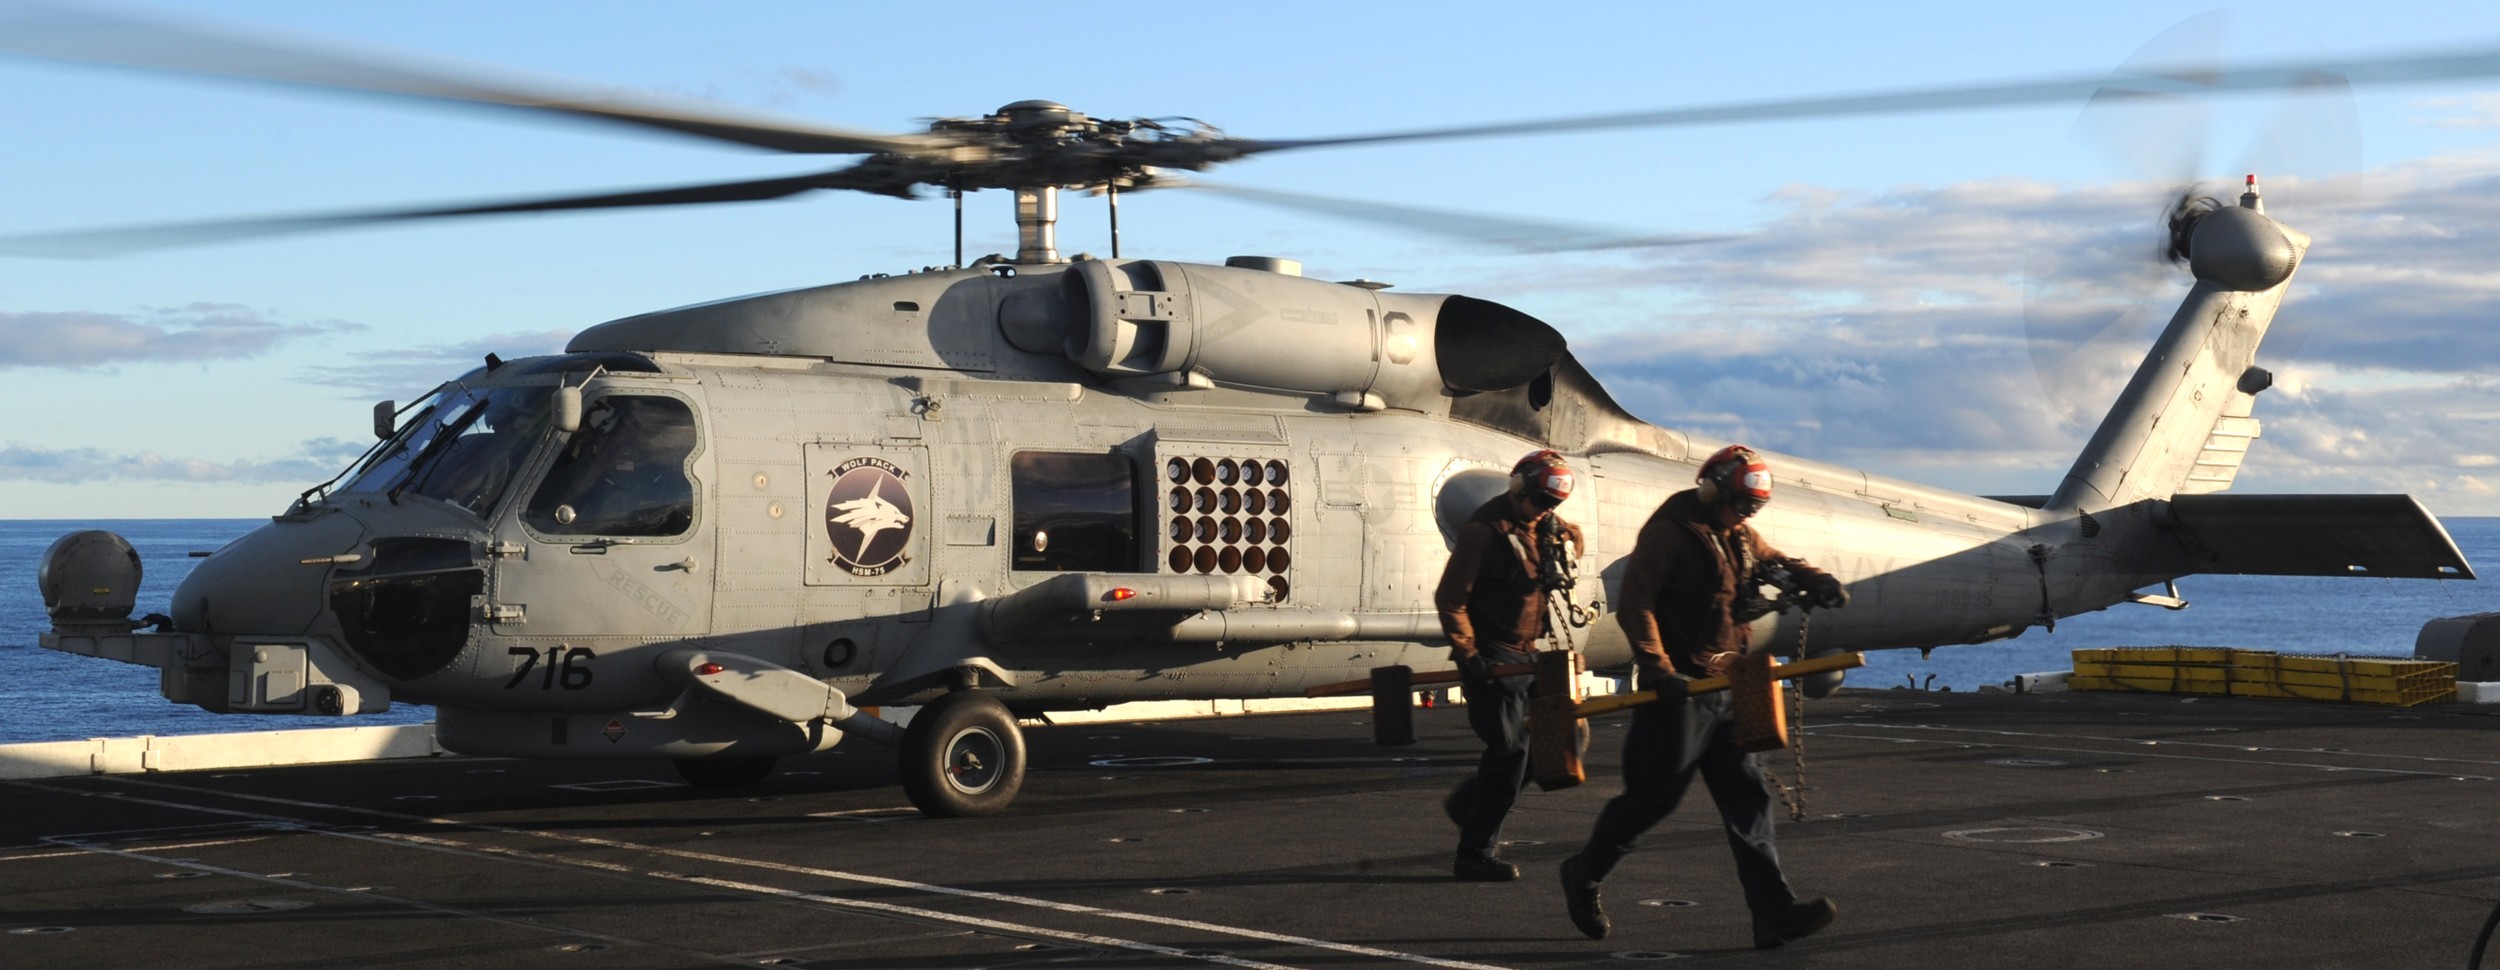 hsm-75 wolfpack helicopter maritime strike squadron us navy mh-60r seahawk 2012 73